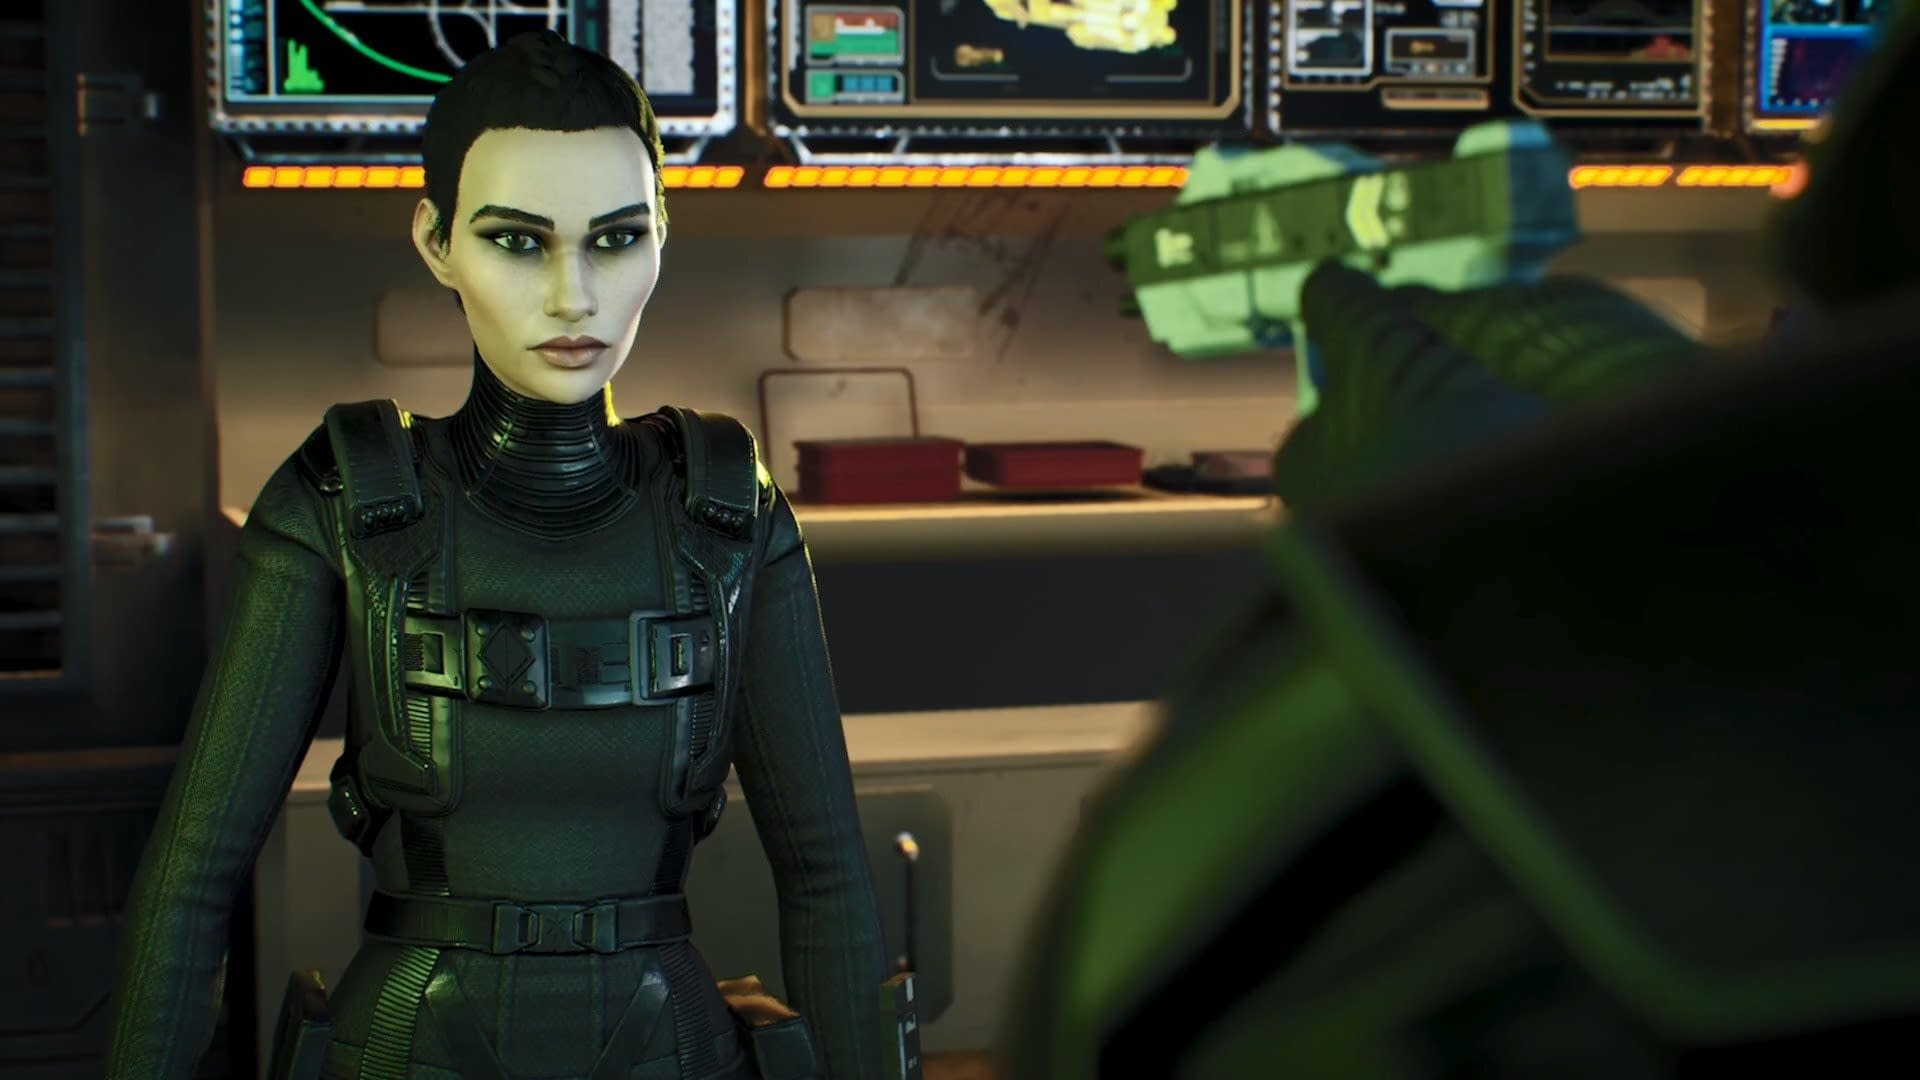 Telltale Series The Expanse has released a developer-to-play video for